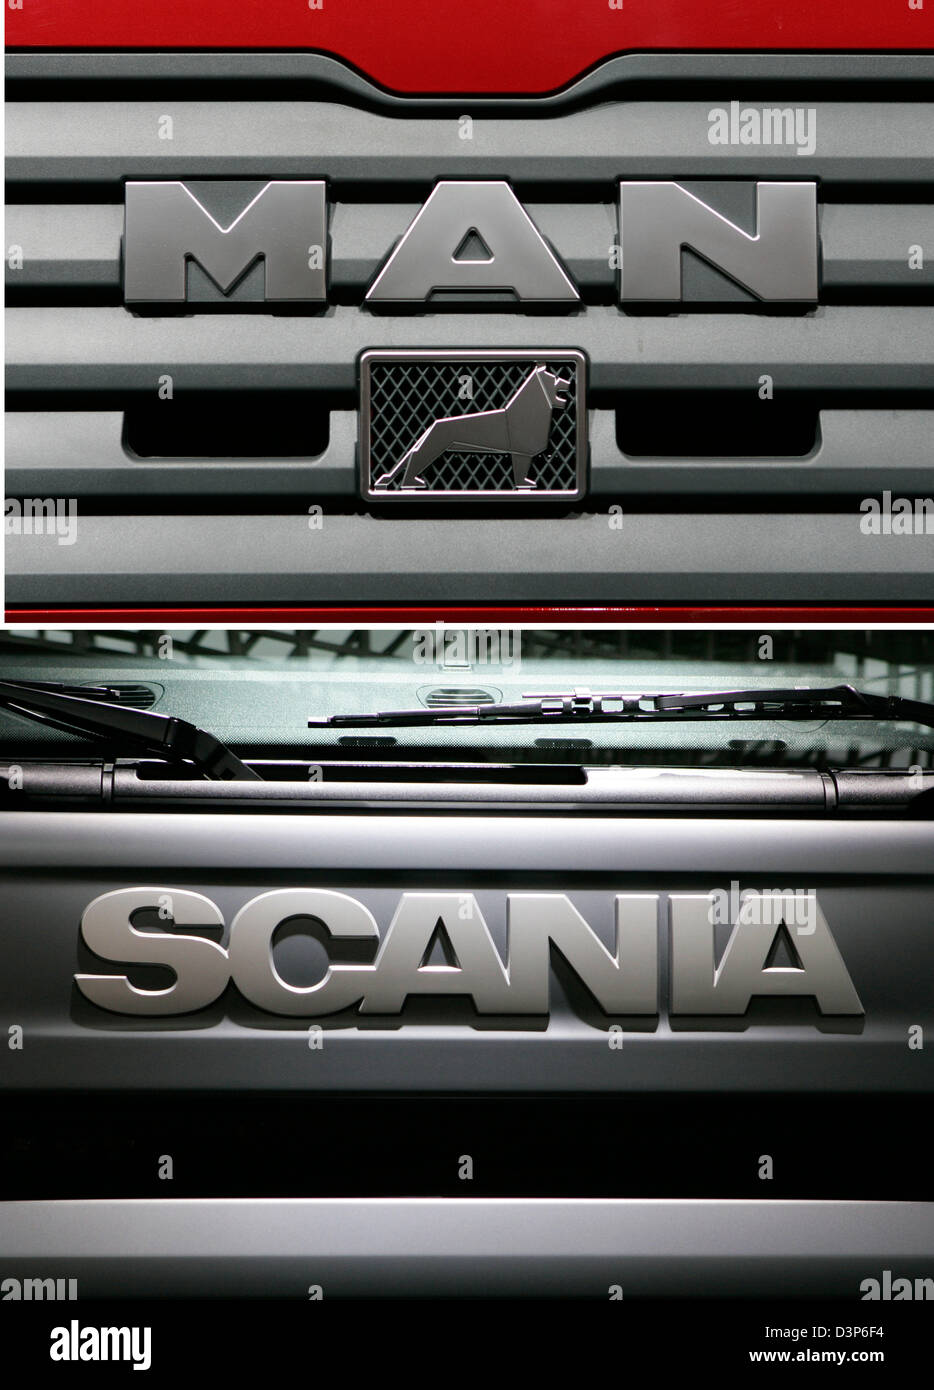 The photos show the company logos of 'SCANIA' and 'MAN' prior to the international automobile trade fair 'IAA Commercial Vehicles' on the compounds of the trade fair in Hanover, Germany, Monday, 18 September 2006. The Swedish company Scania rejected a take-over bid by its German competitor MAN on Monday. The IAA Commercial Vehicles will open from 21 to 28 September 2006. Photo: Rai Stock Photo